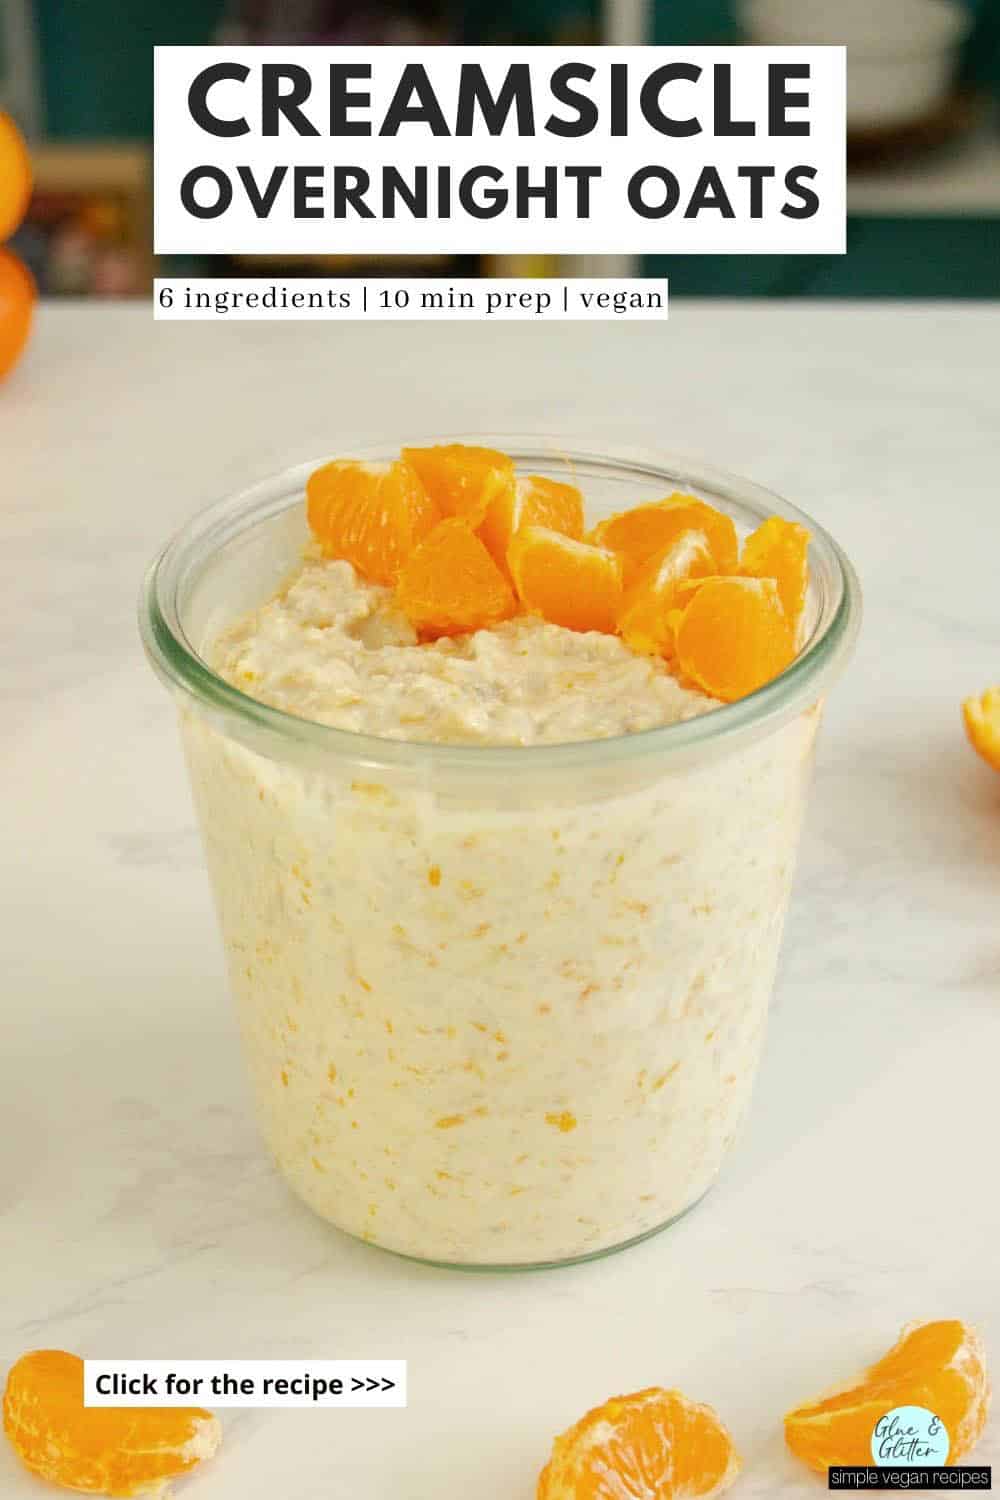 creamsicle overnight oats with chopped orange slices on top, text overlay